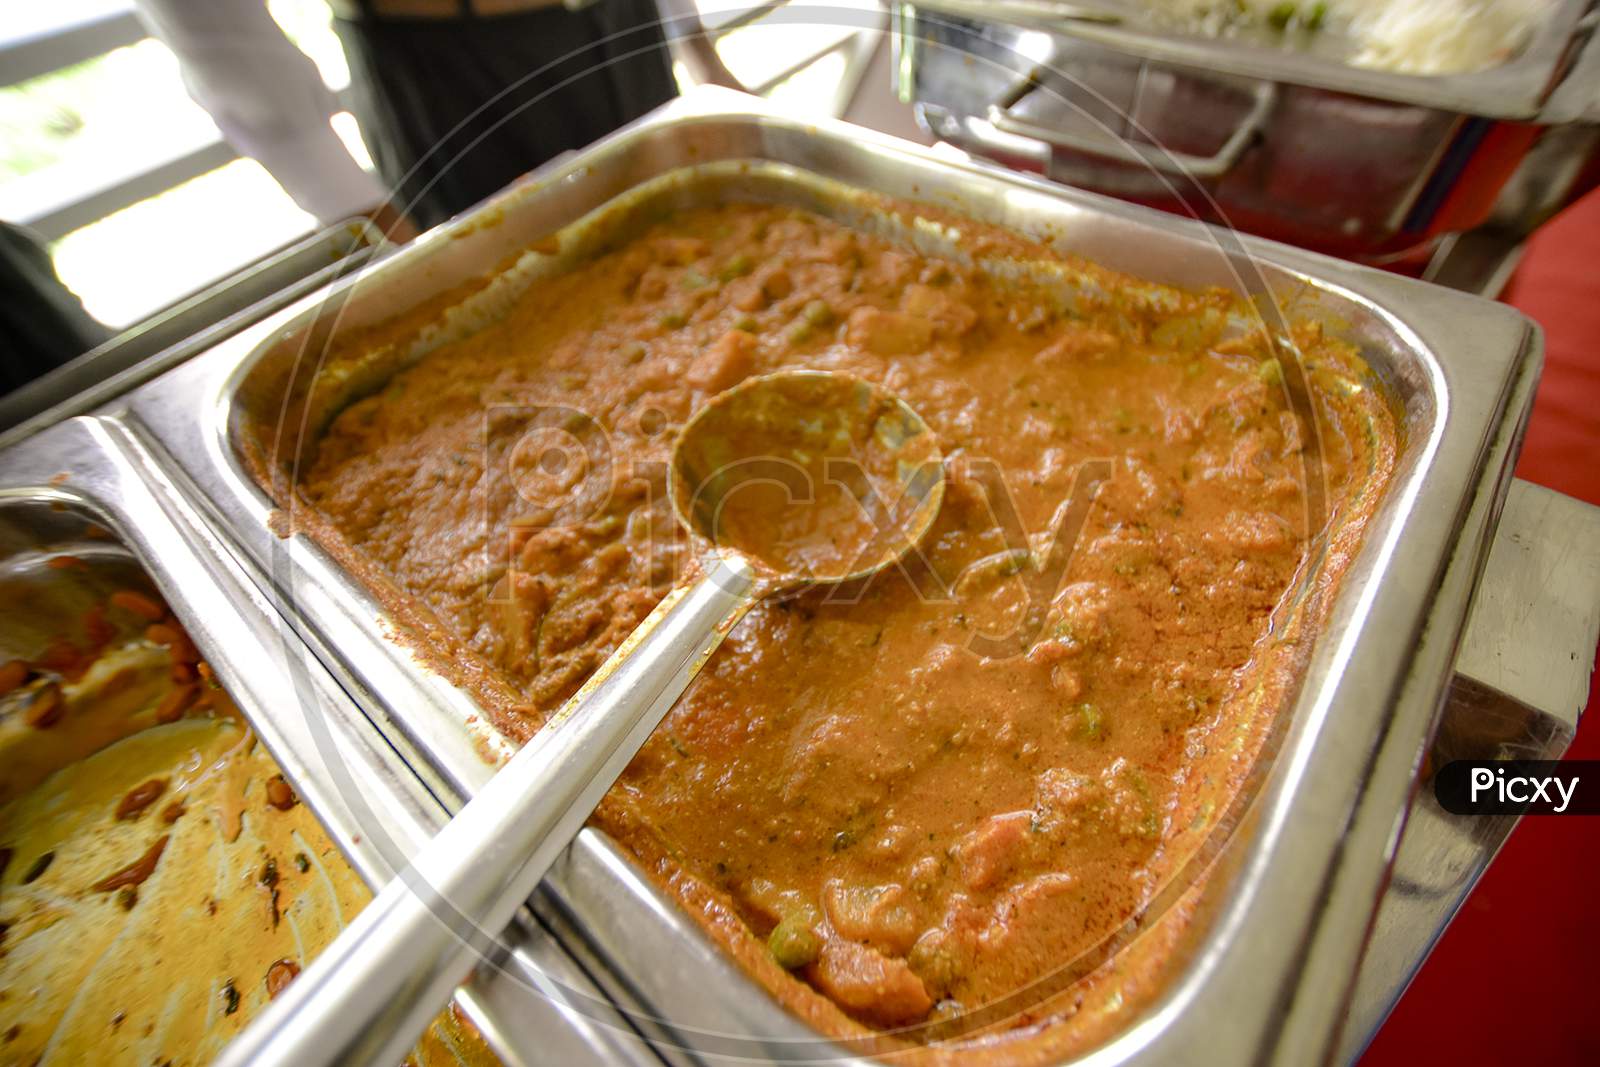 Mixed Veg Curry  In a Bowl  At a Buffet Table